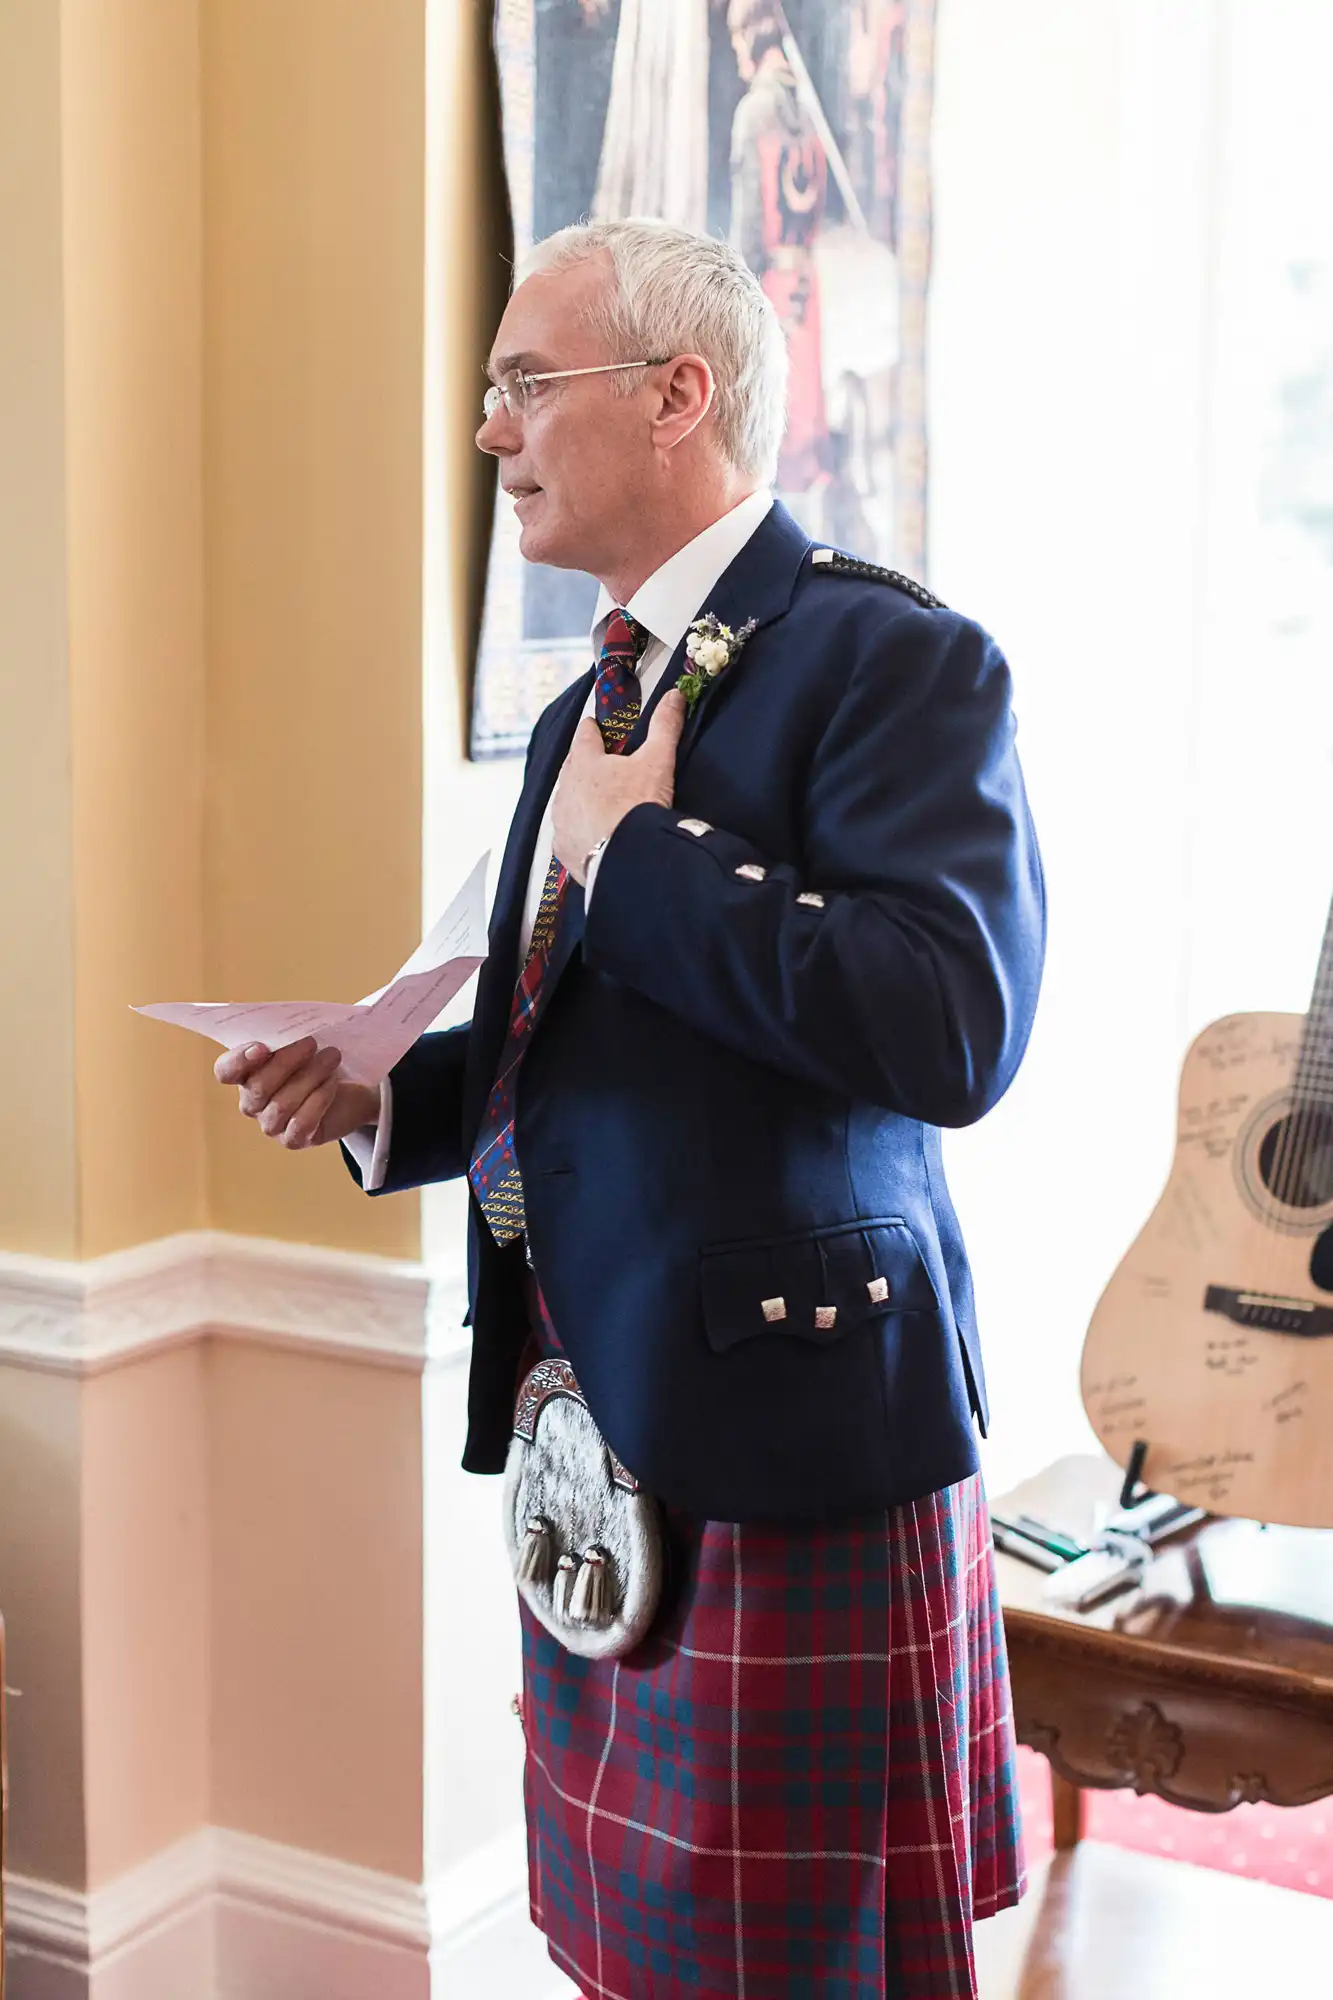 A man in a traditional scottish outfit, featuring a kilt and sporran, stands in a room holding a speech note, with a guitar in the background.